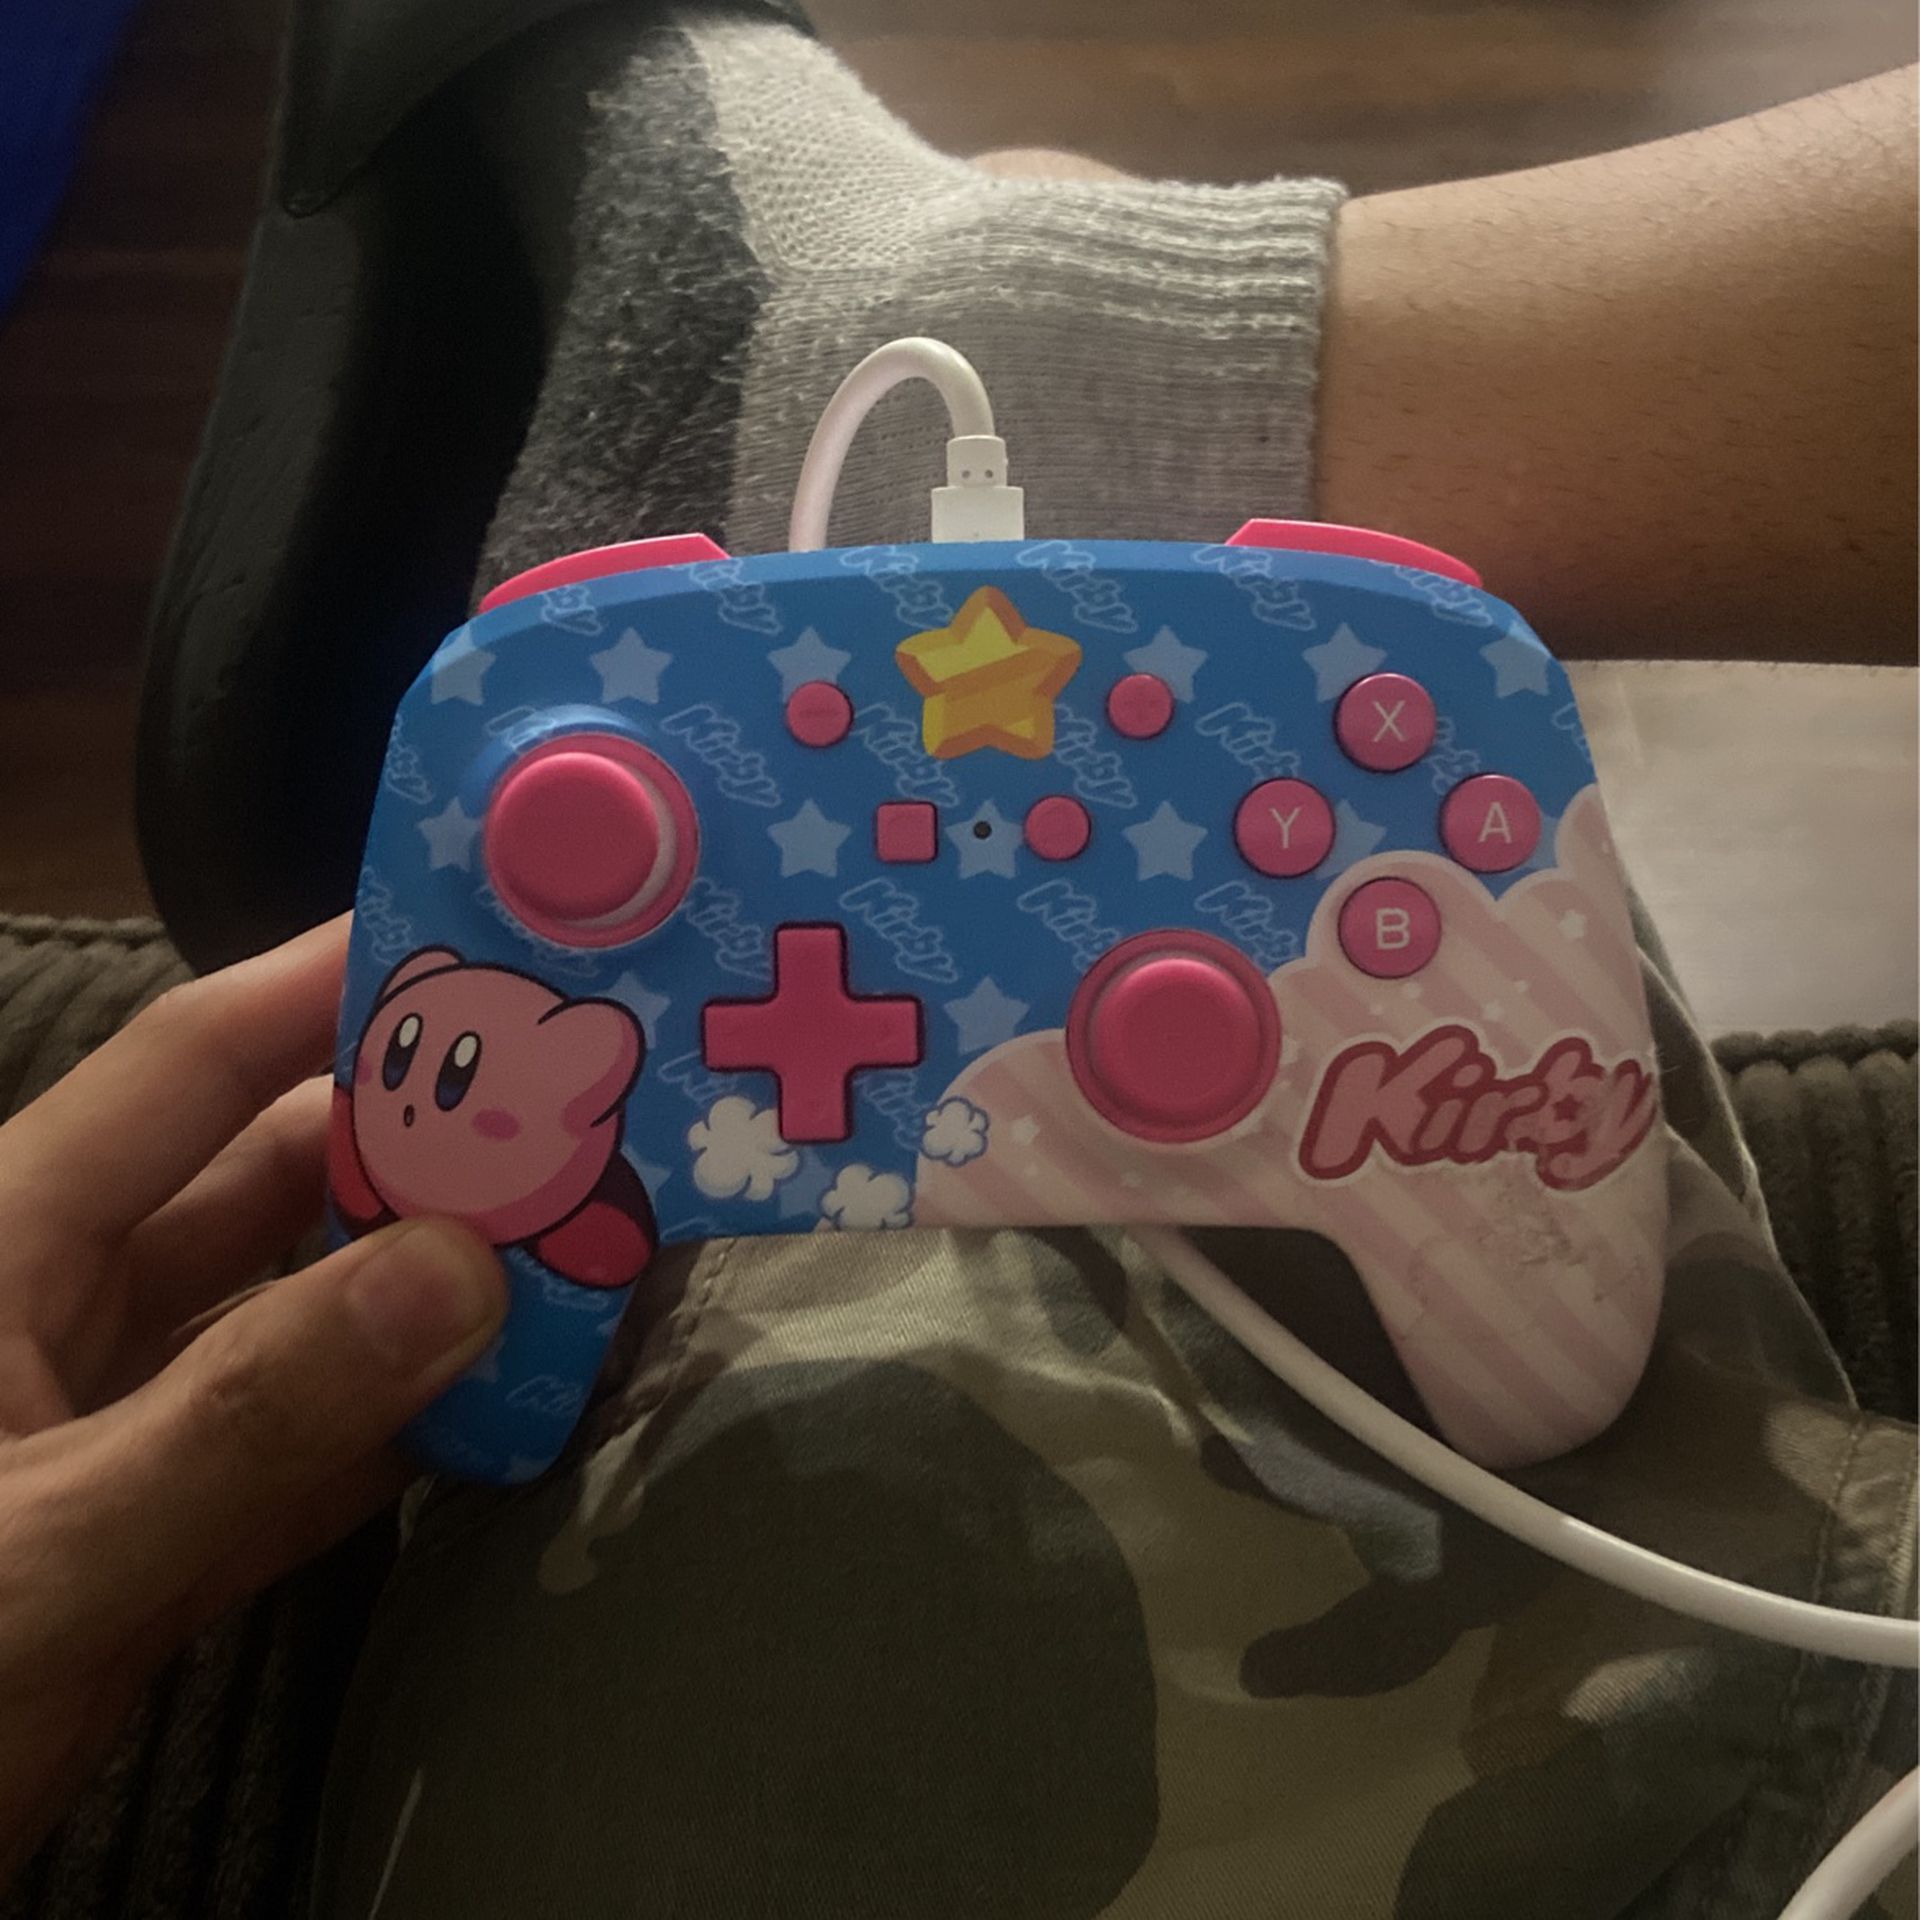 Kirby Controller 